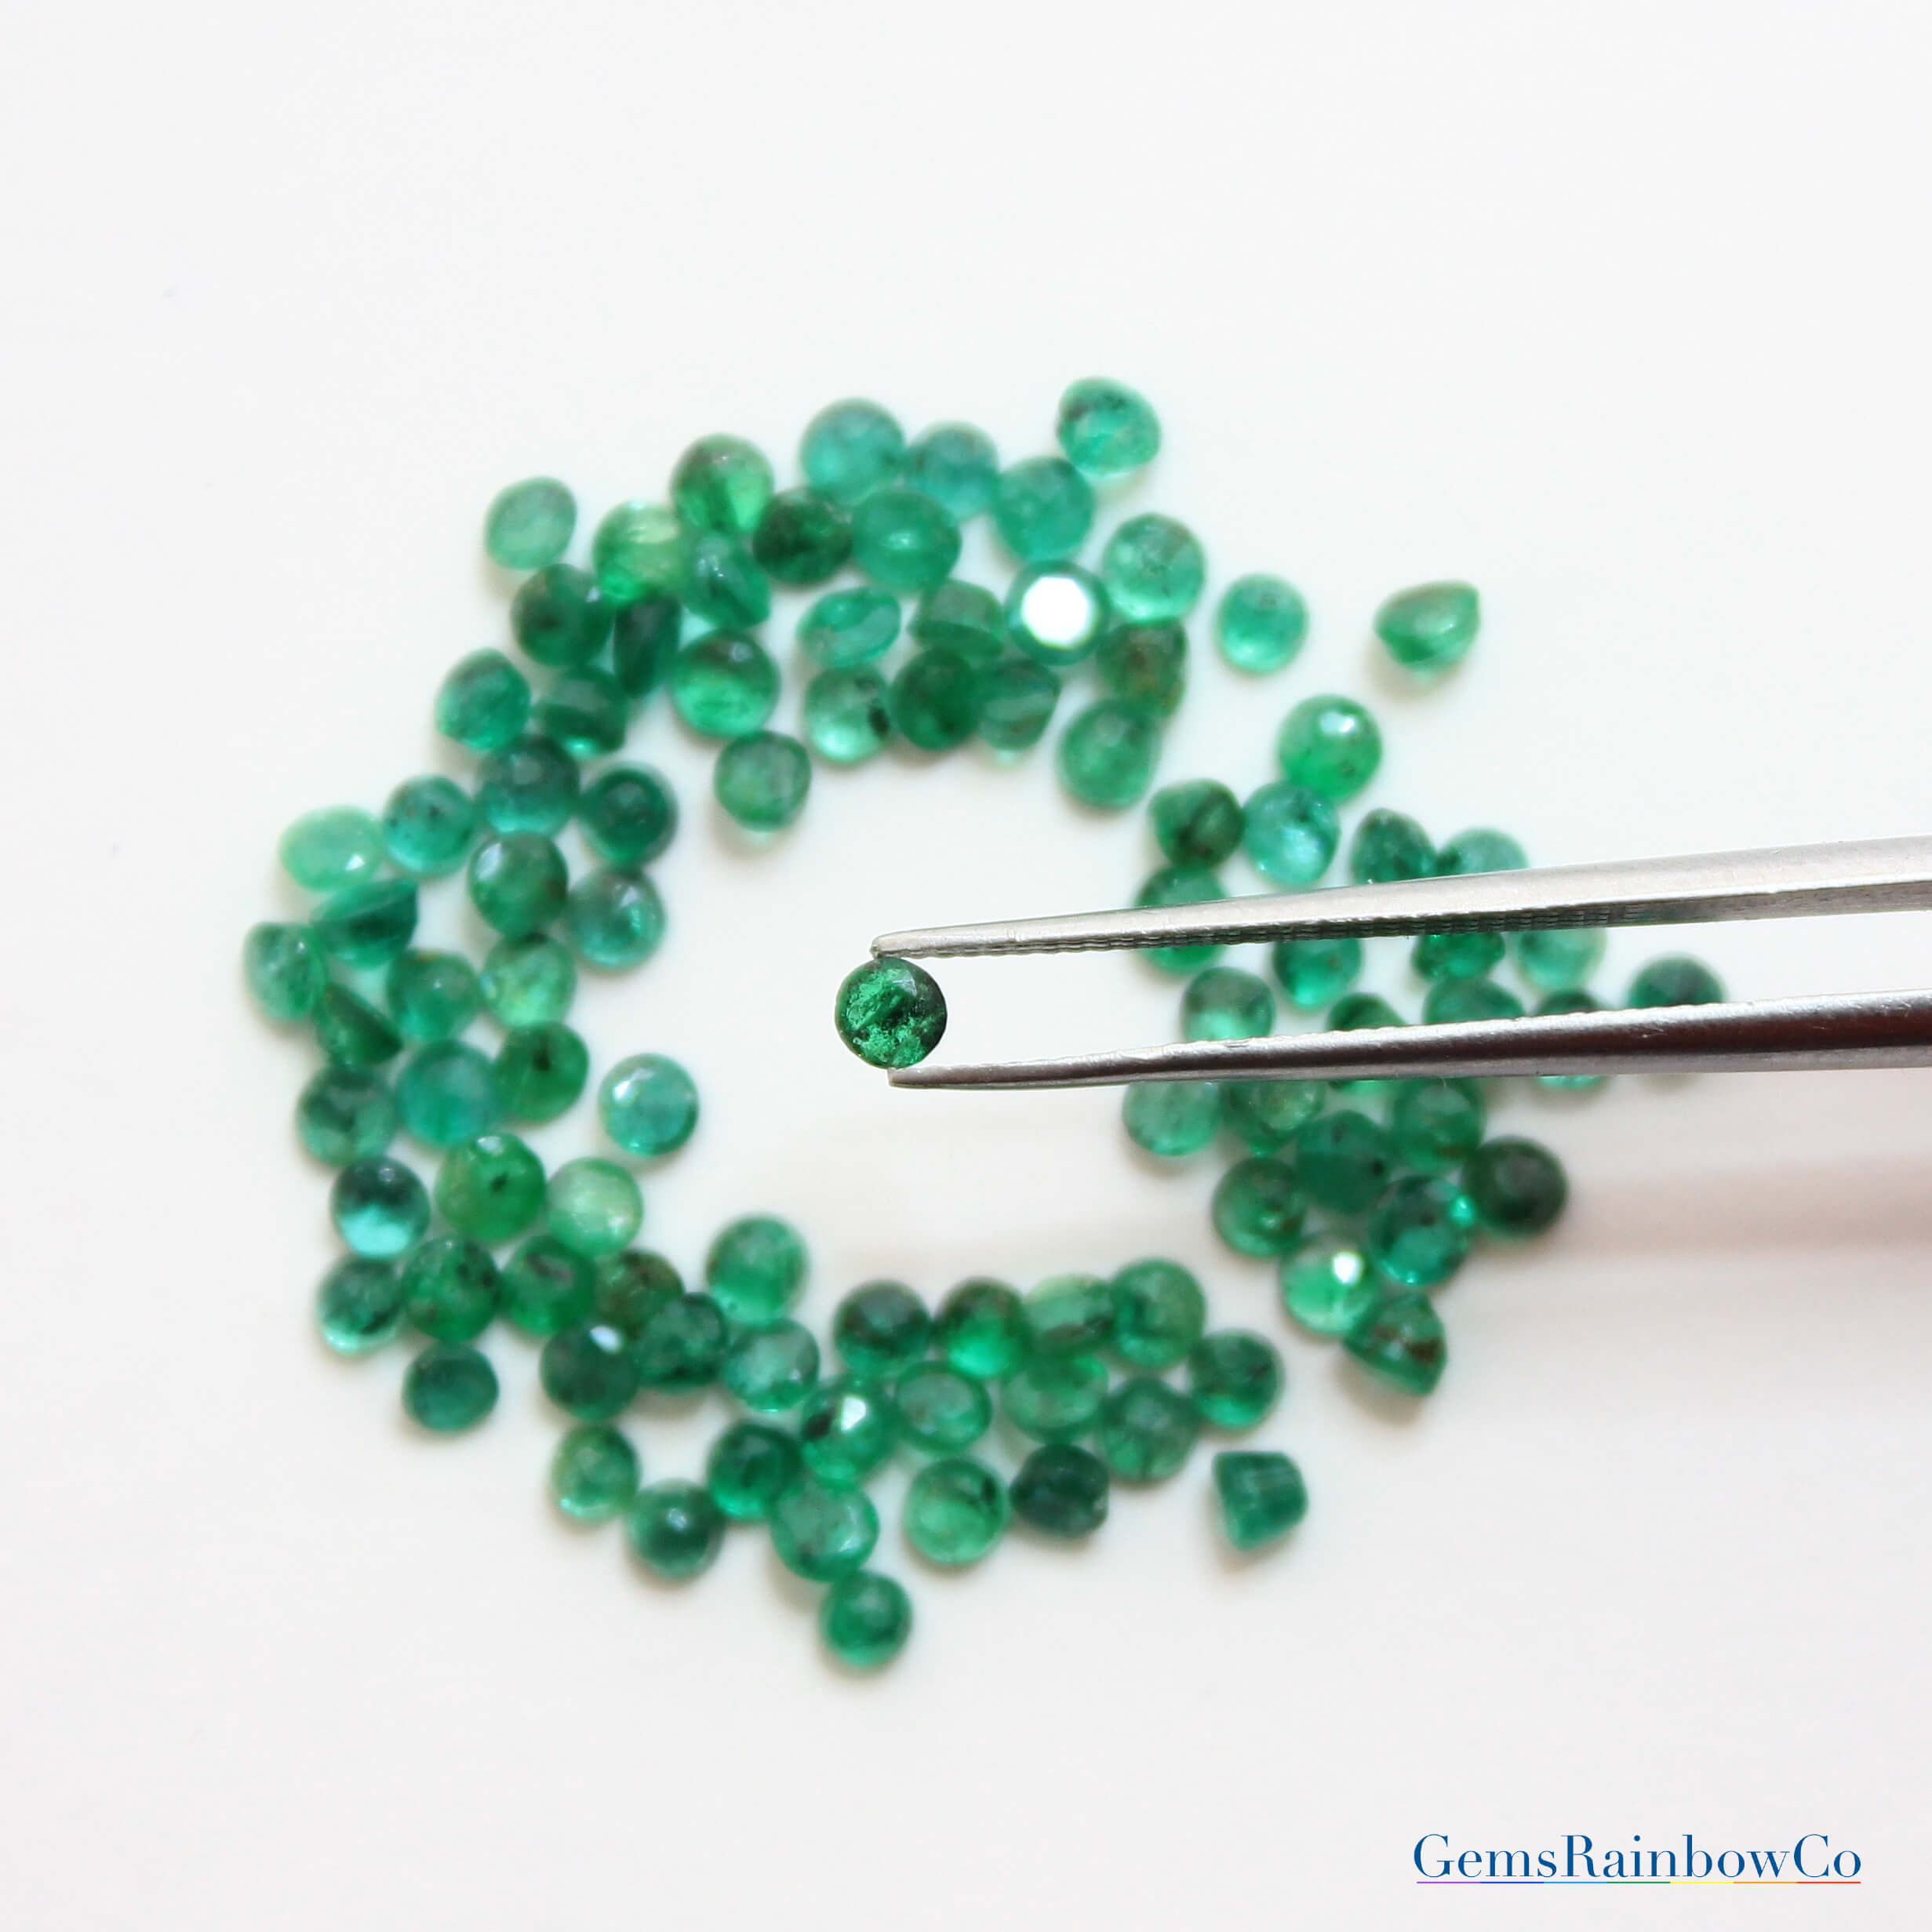 Wholesale Lot 1.5mm to 3mm Round Facet Zambian Emerald Loose Calibrated Gemstone 